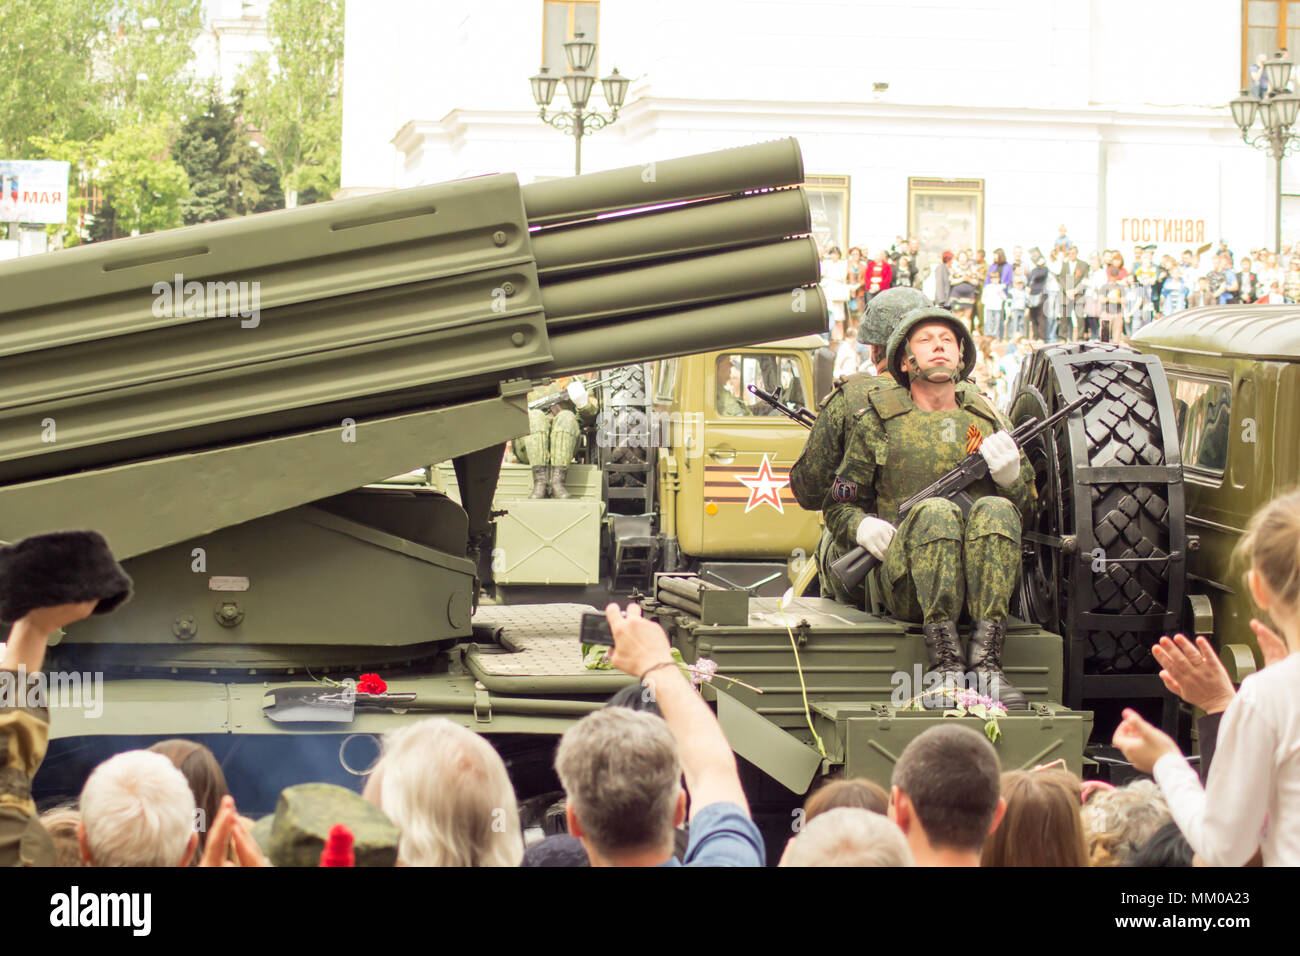 DONETSK, Donetsk People Republic. May 9, 2018: Soviet anti-air gun track with gunners on the main street of the Donetsk city during the Victory Day Parade.DONETSK, Donetsk People Republic. May 9, 2018: Soviet artillery MLRS BM-21 Grad on the main street of the Donetsk city during the Victory Day Parade. Credit: An147/Alamy Live News Stock Photo